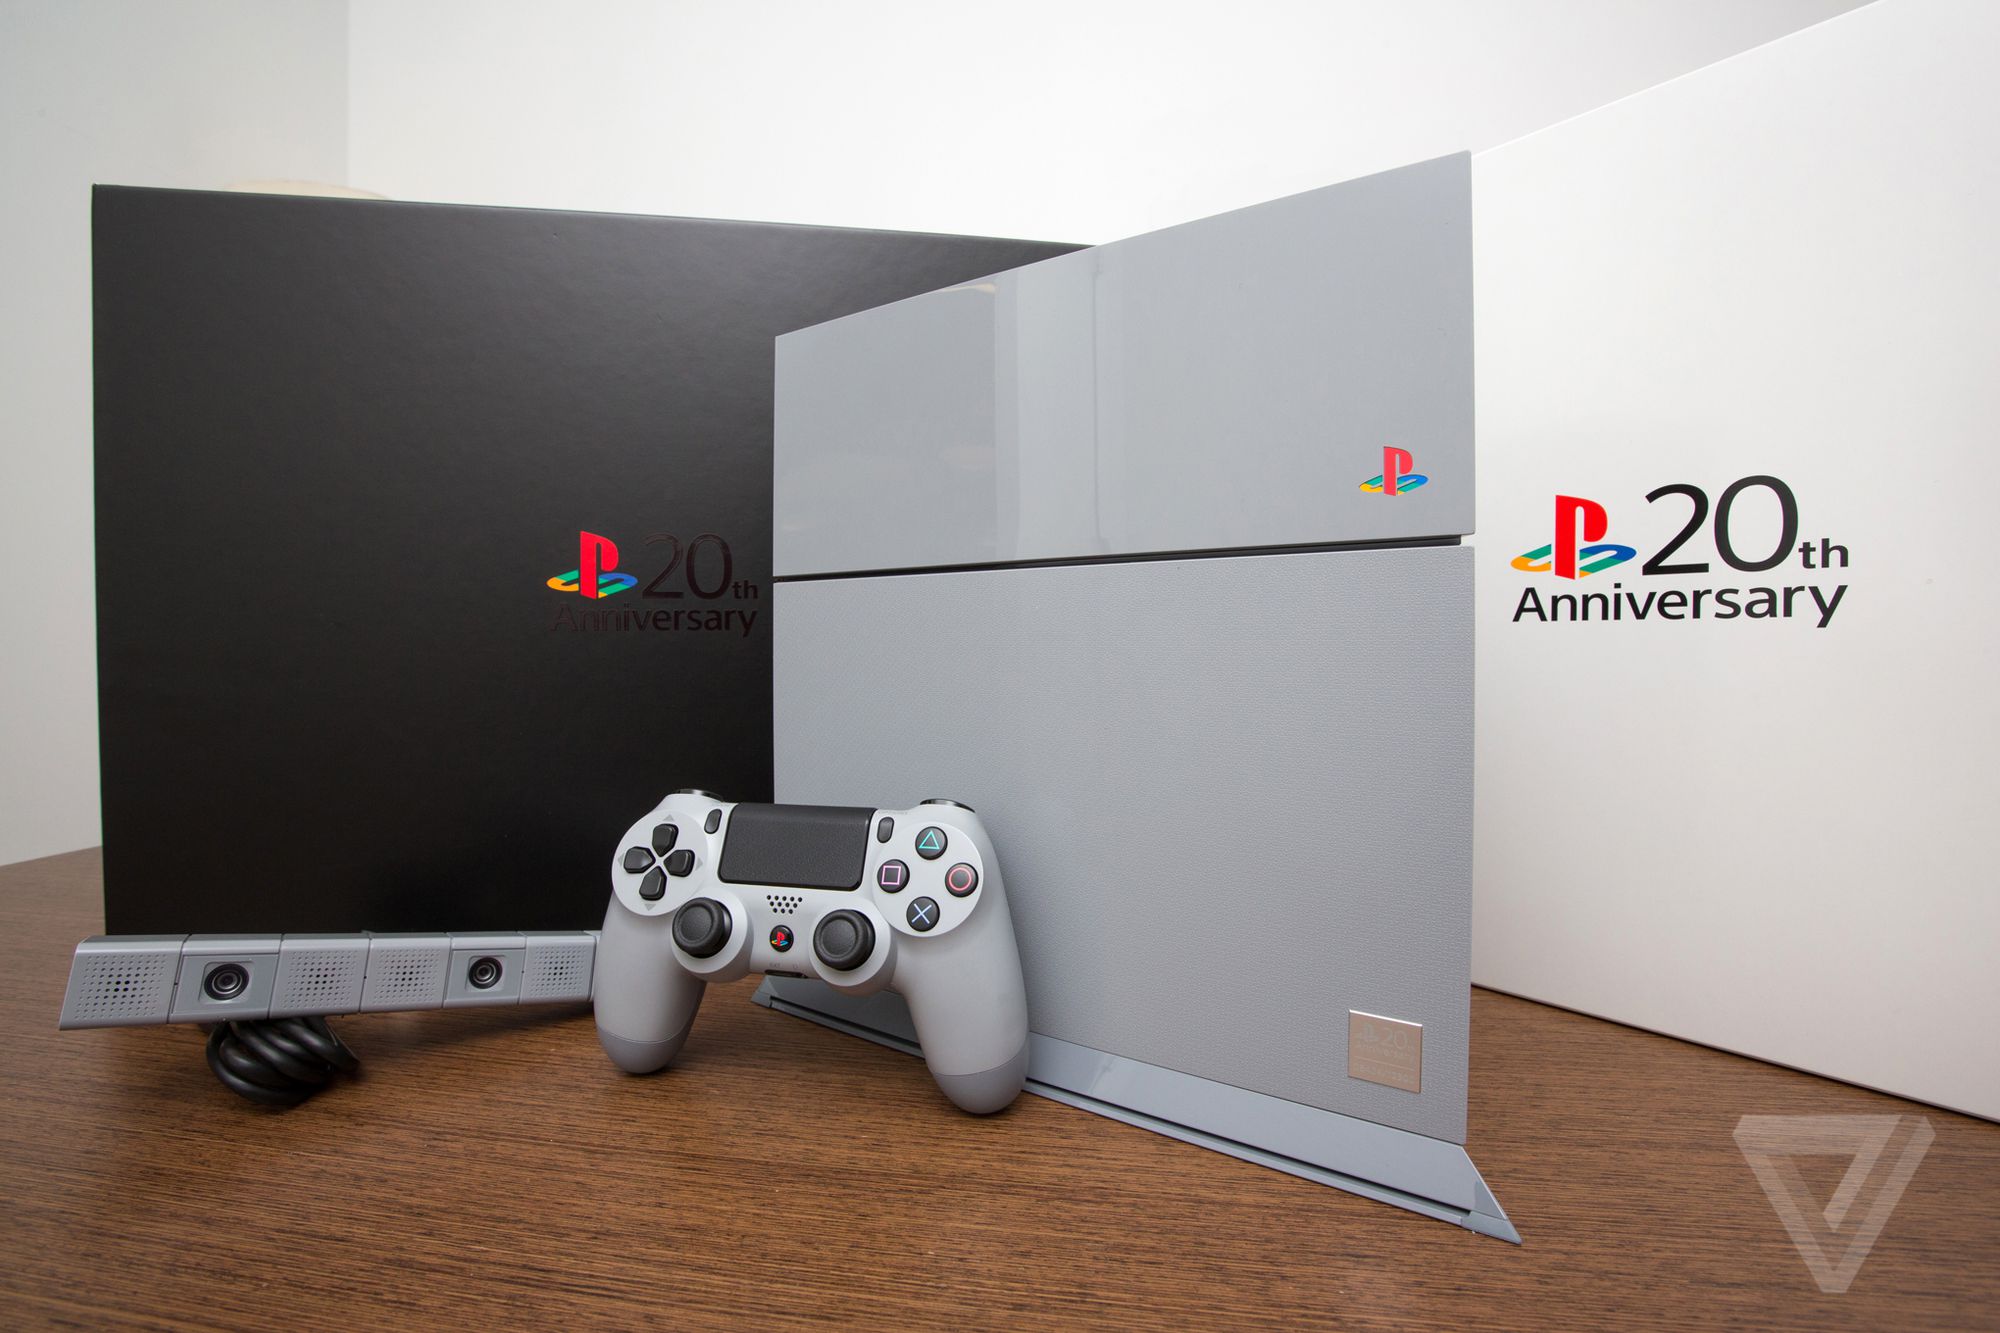 Meyella Reklame sne hvid Up close with the beautiful 20th anniversary PlayStation 4 - The Verge